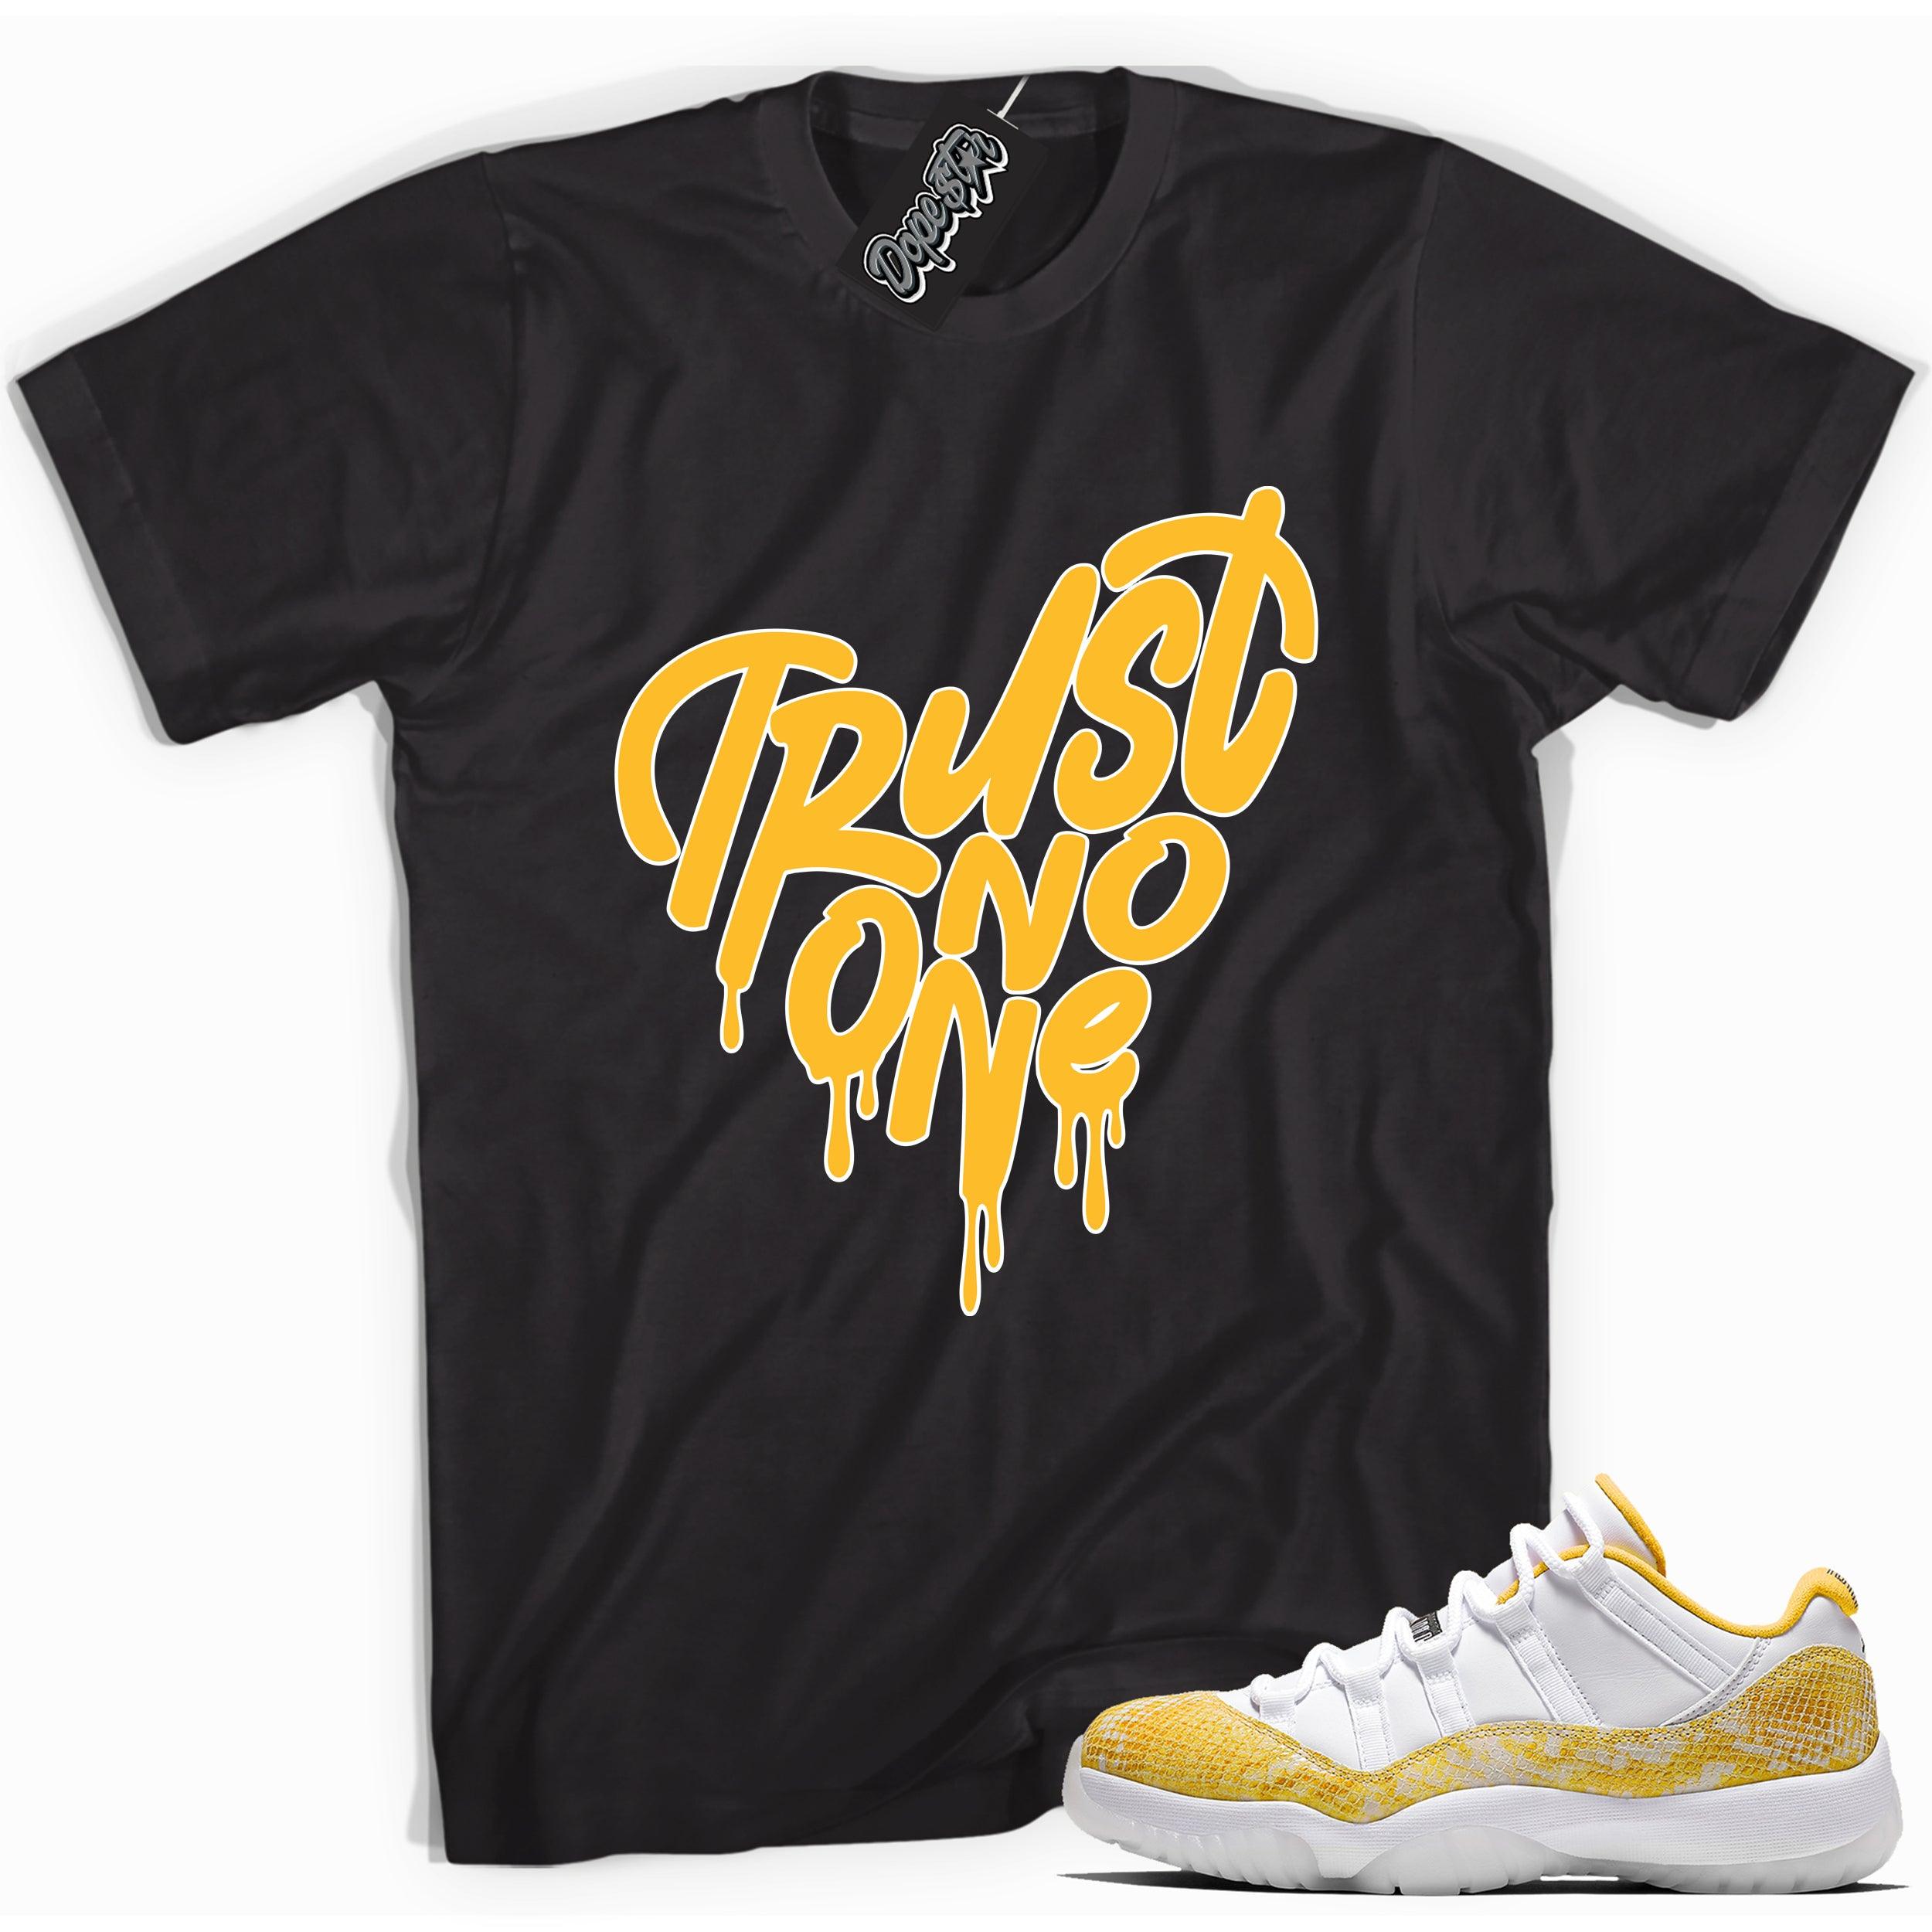 Cool black graphic tee with 'trust no one' print, that perfectly matches  Air Jordan 11 Retro Low Yellow Snakeskin sneakers